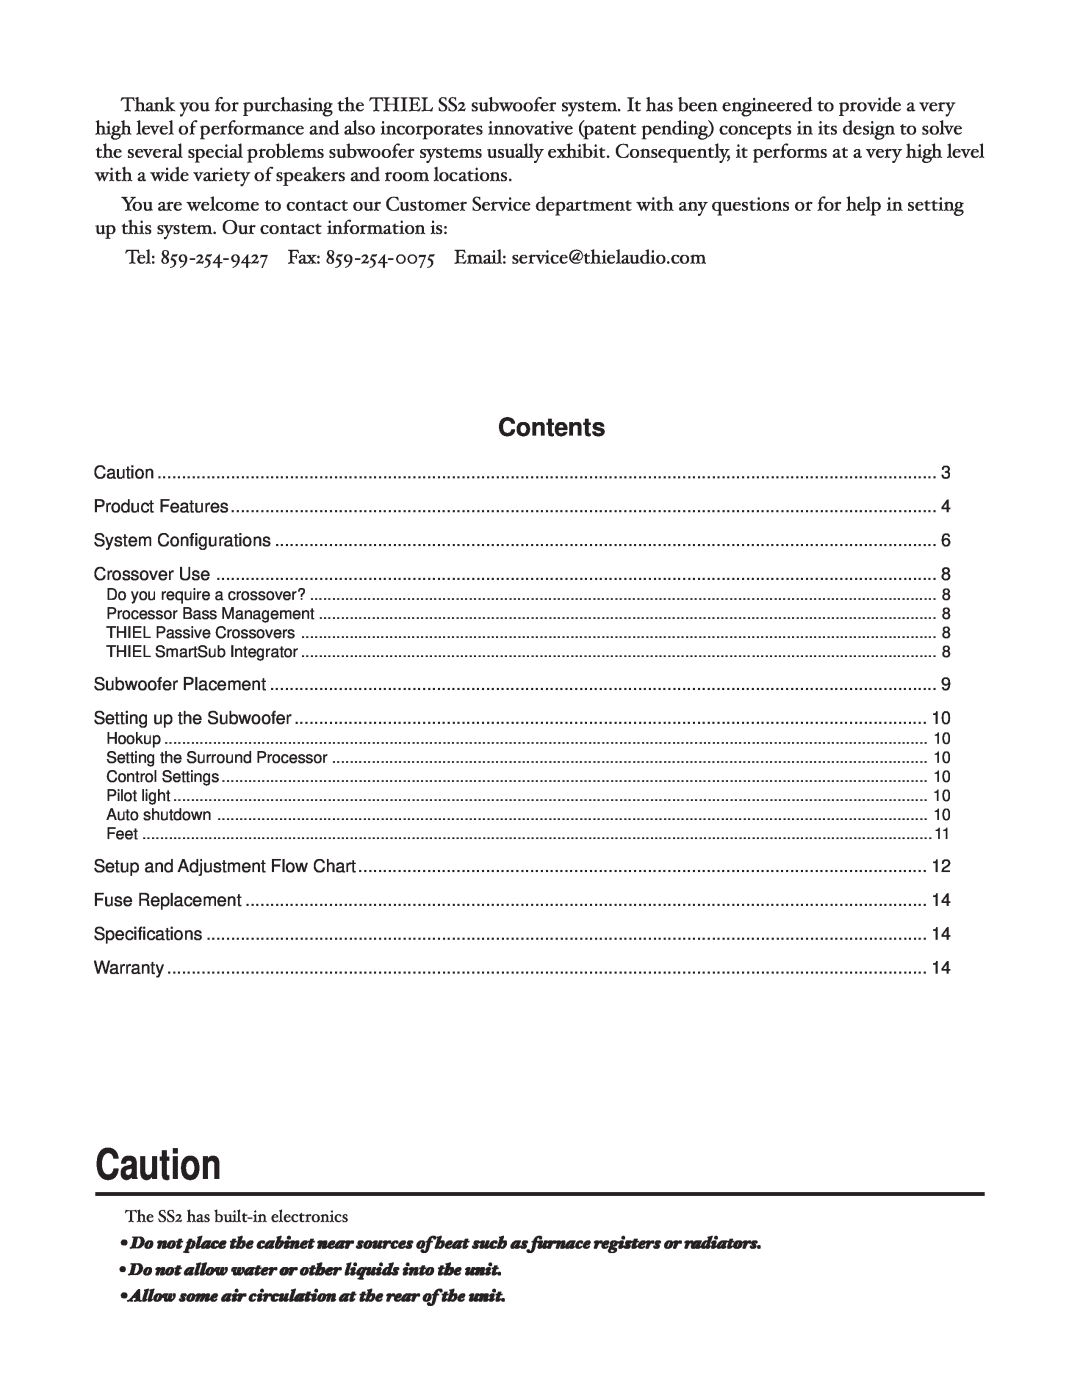 Thiel Audio Products manual Contents, The SS2 has built-inelectronics 